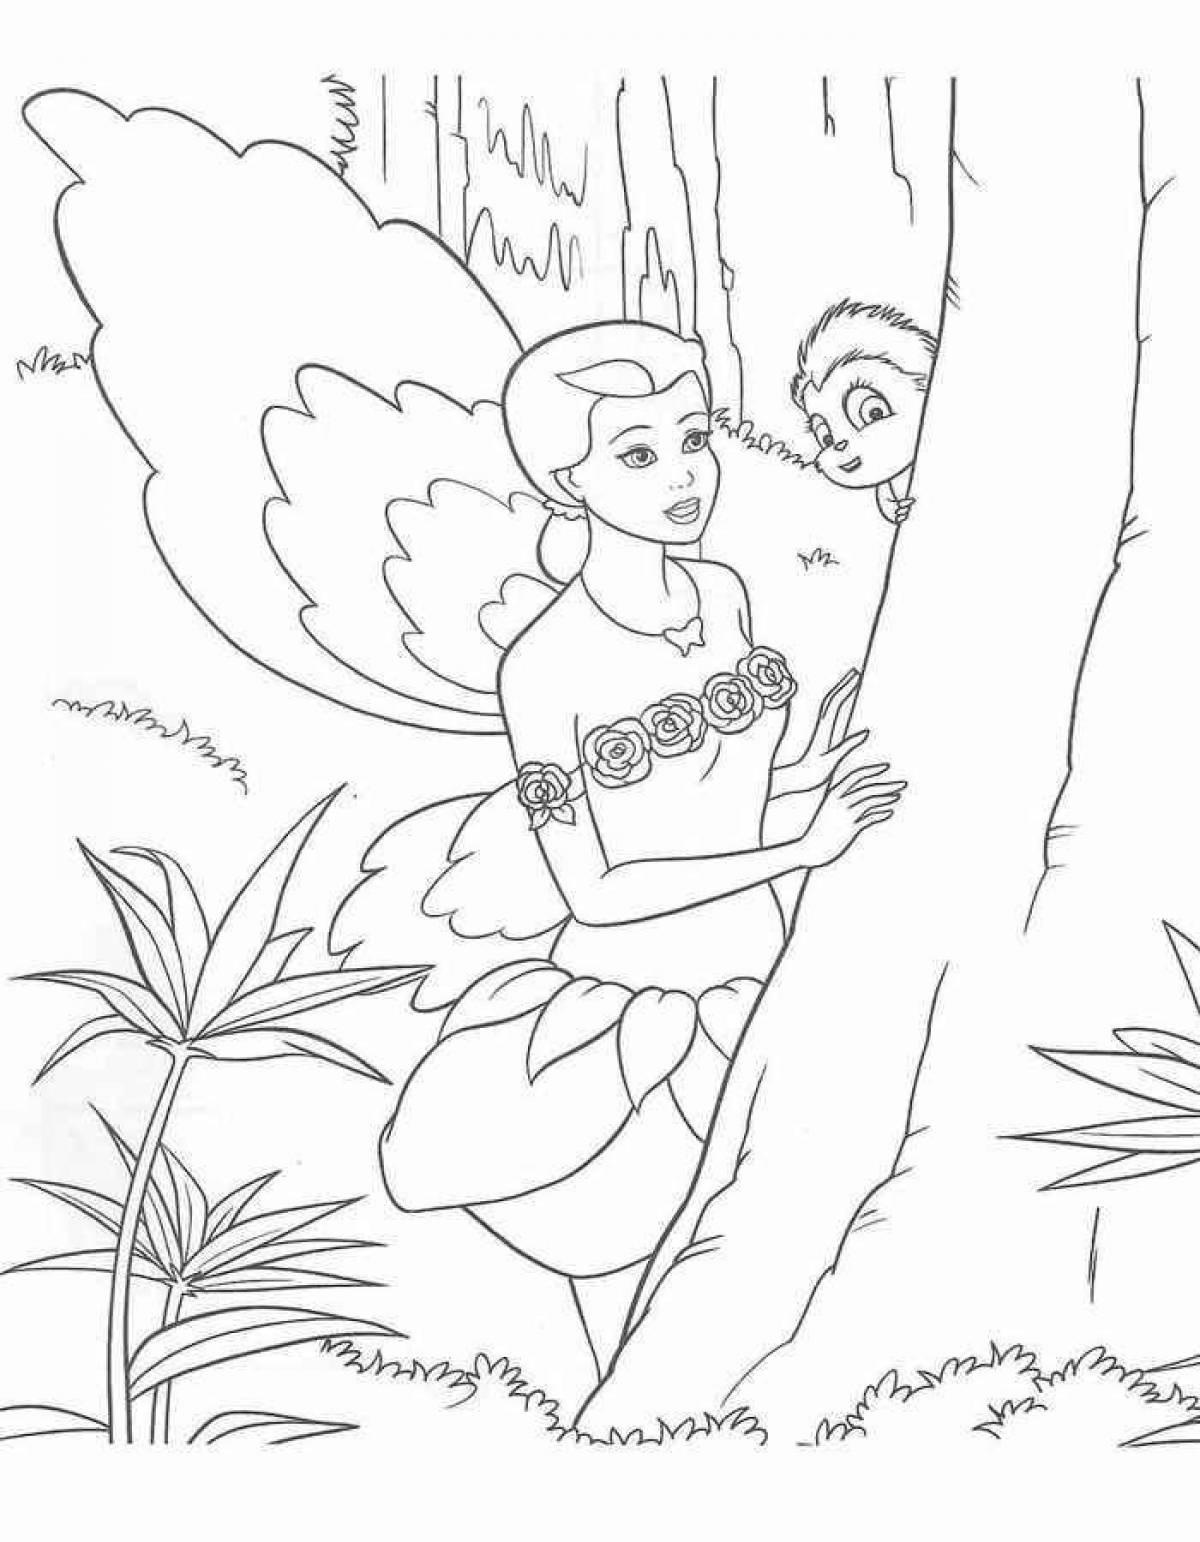 Coloring page two smiling friends